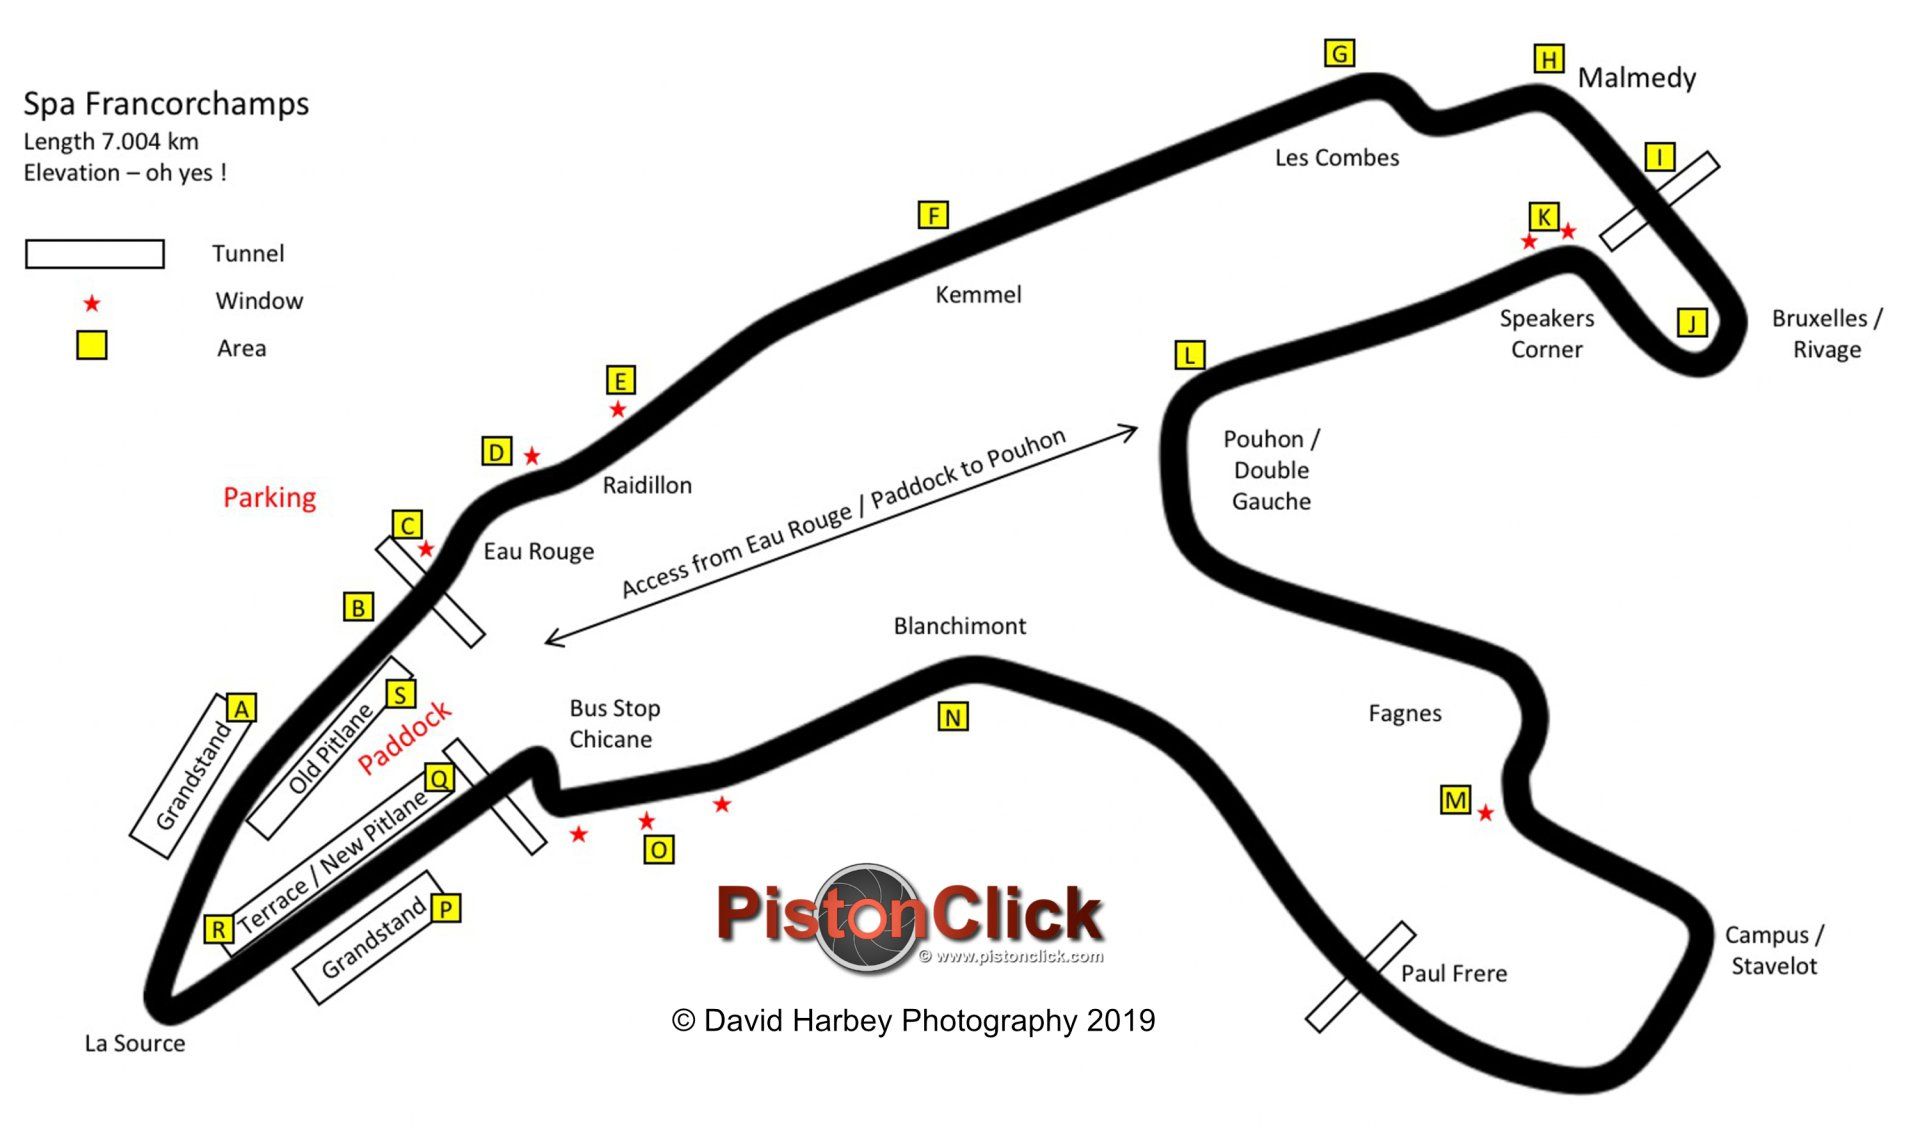 Spa Francorchamps map